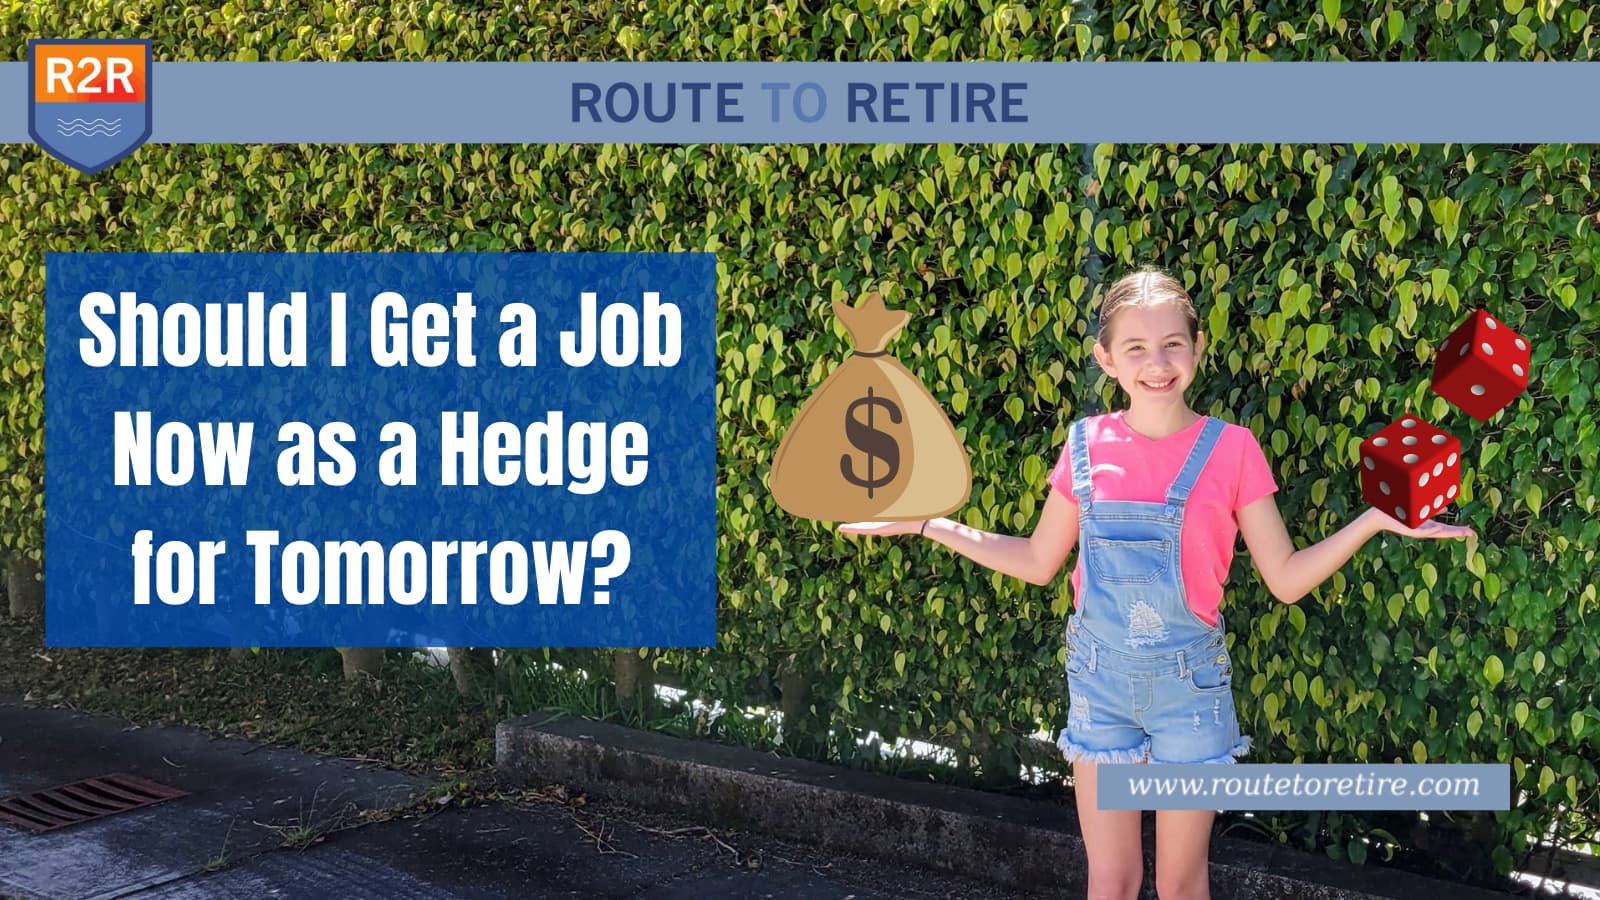 Should I Get a Job Now as a Hedge for Tomorrow?